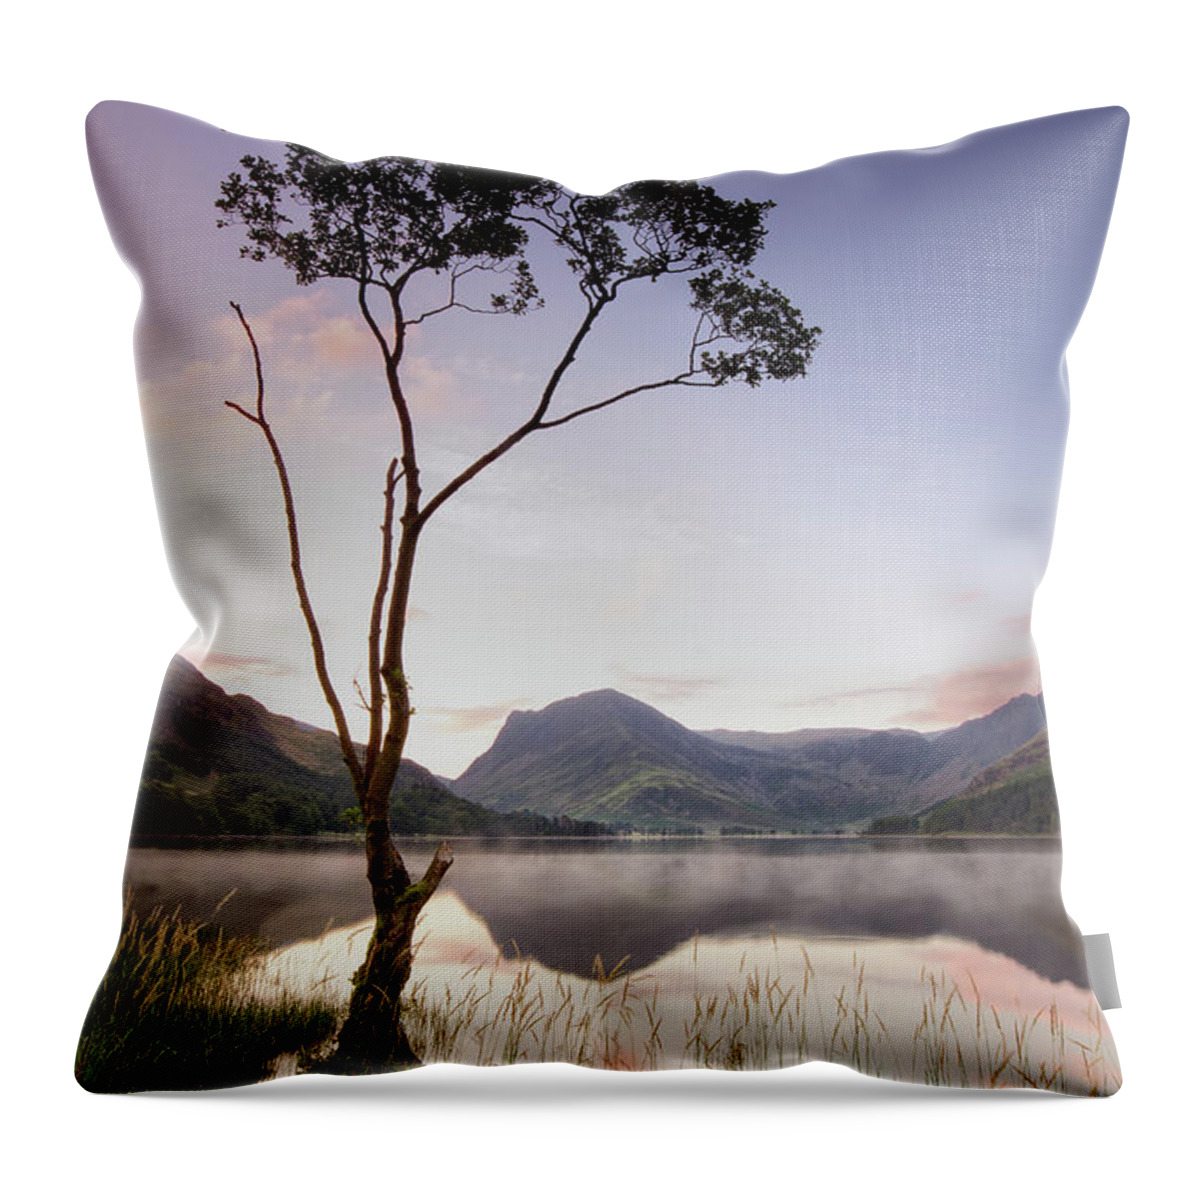 Scenics Throw Pillow featuring the photograph Buttermere Tree by Phil Buckle